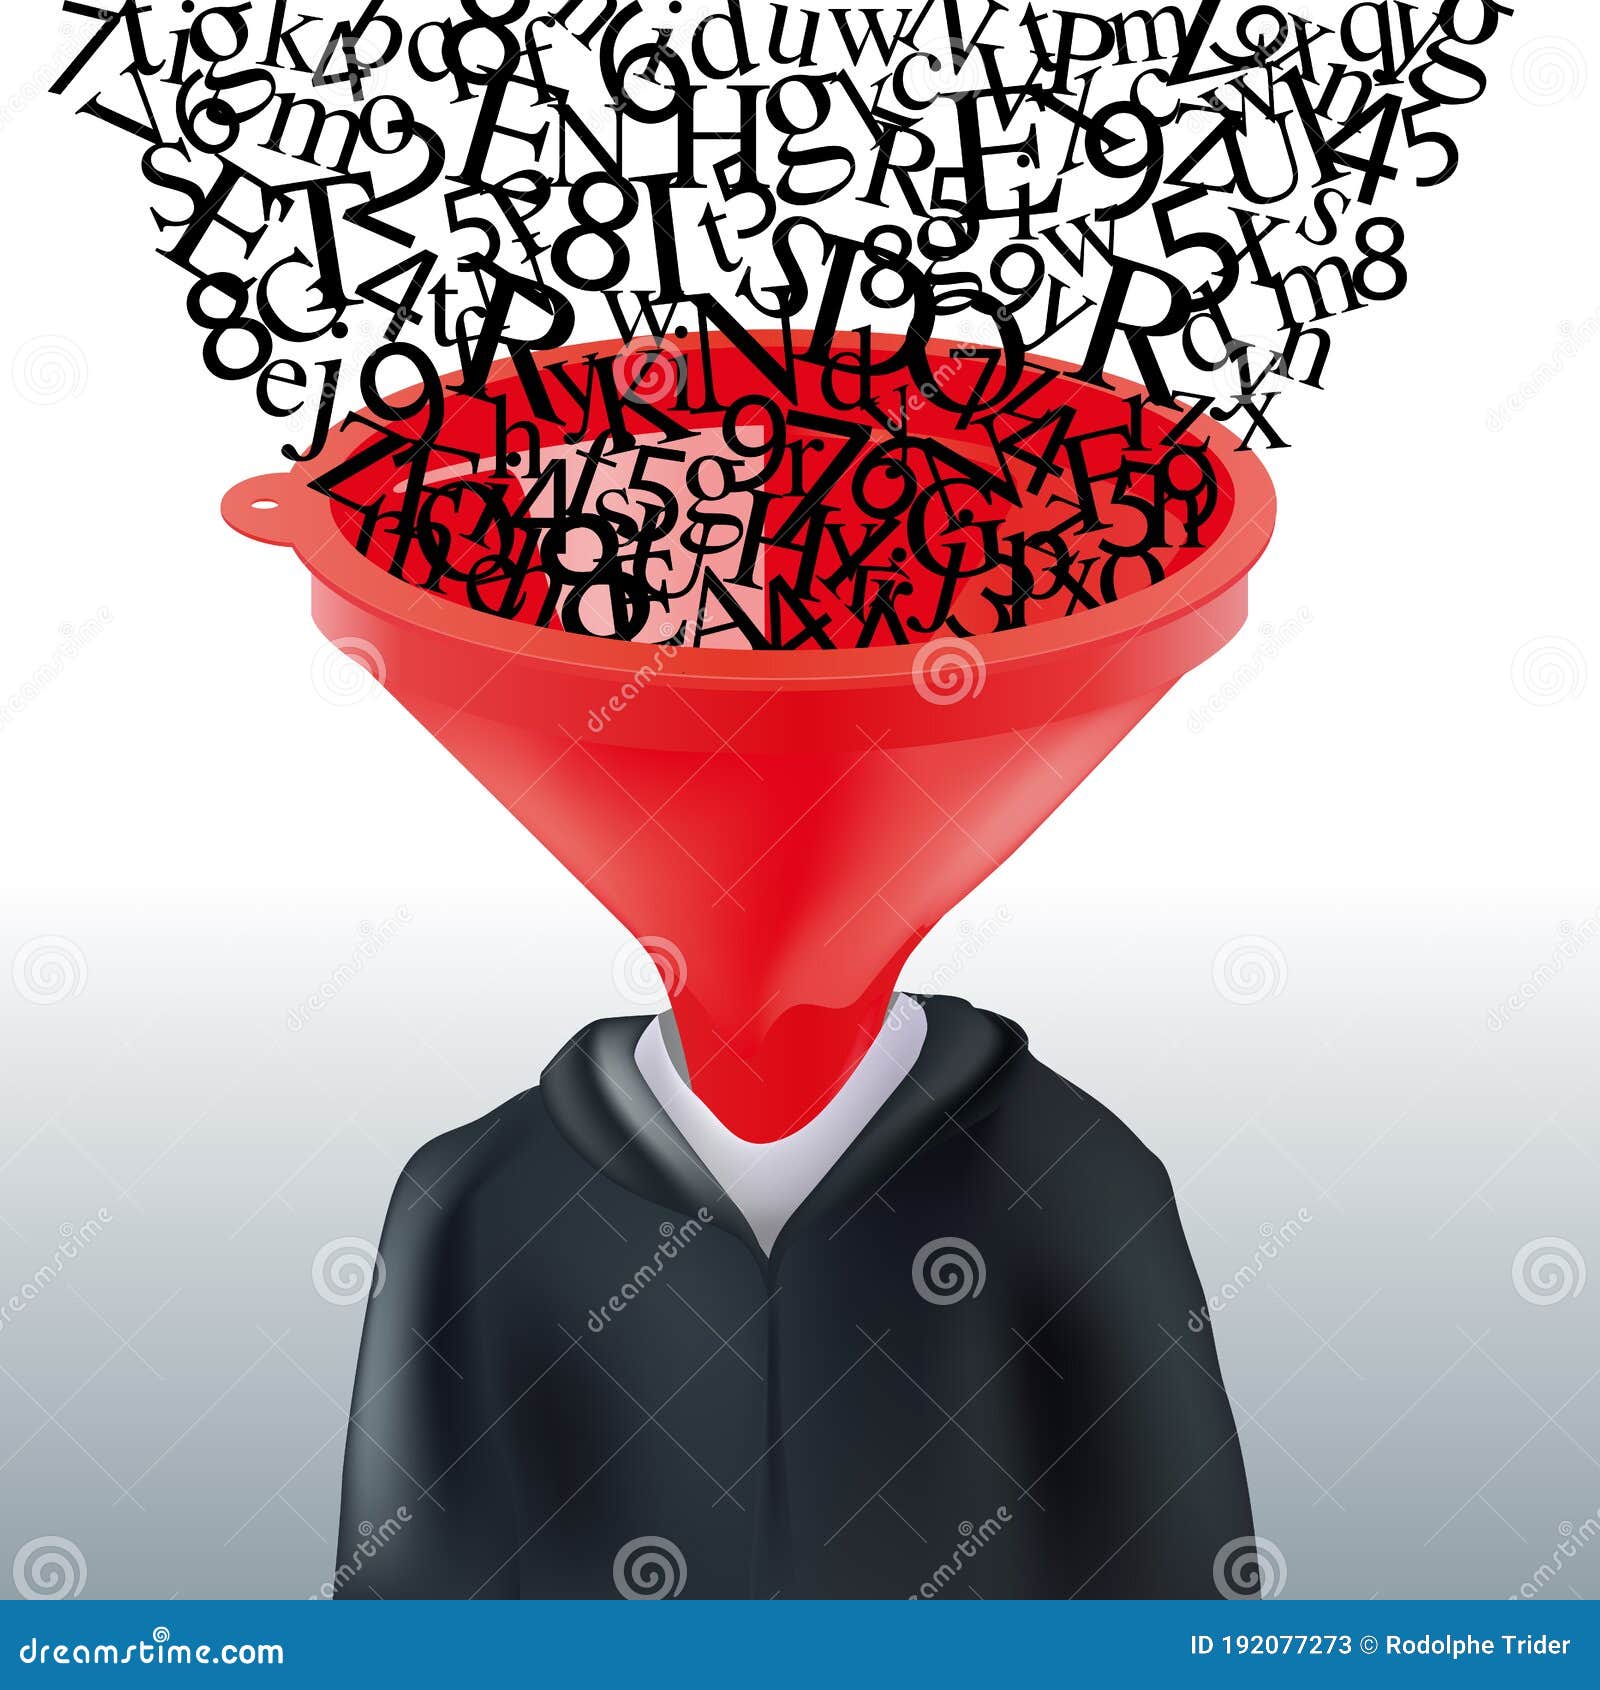 concept of teaching, ized by a pupil whose head is replaced by a funnel through which his knowledge enters.